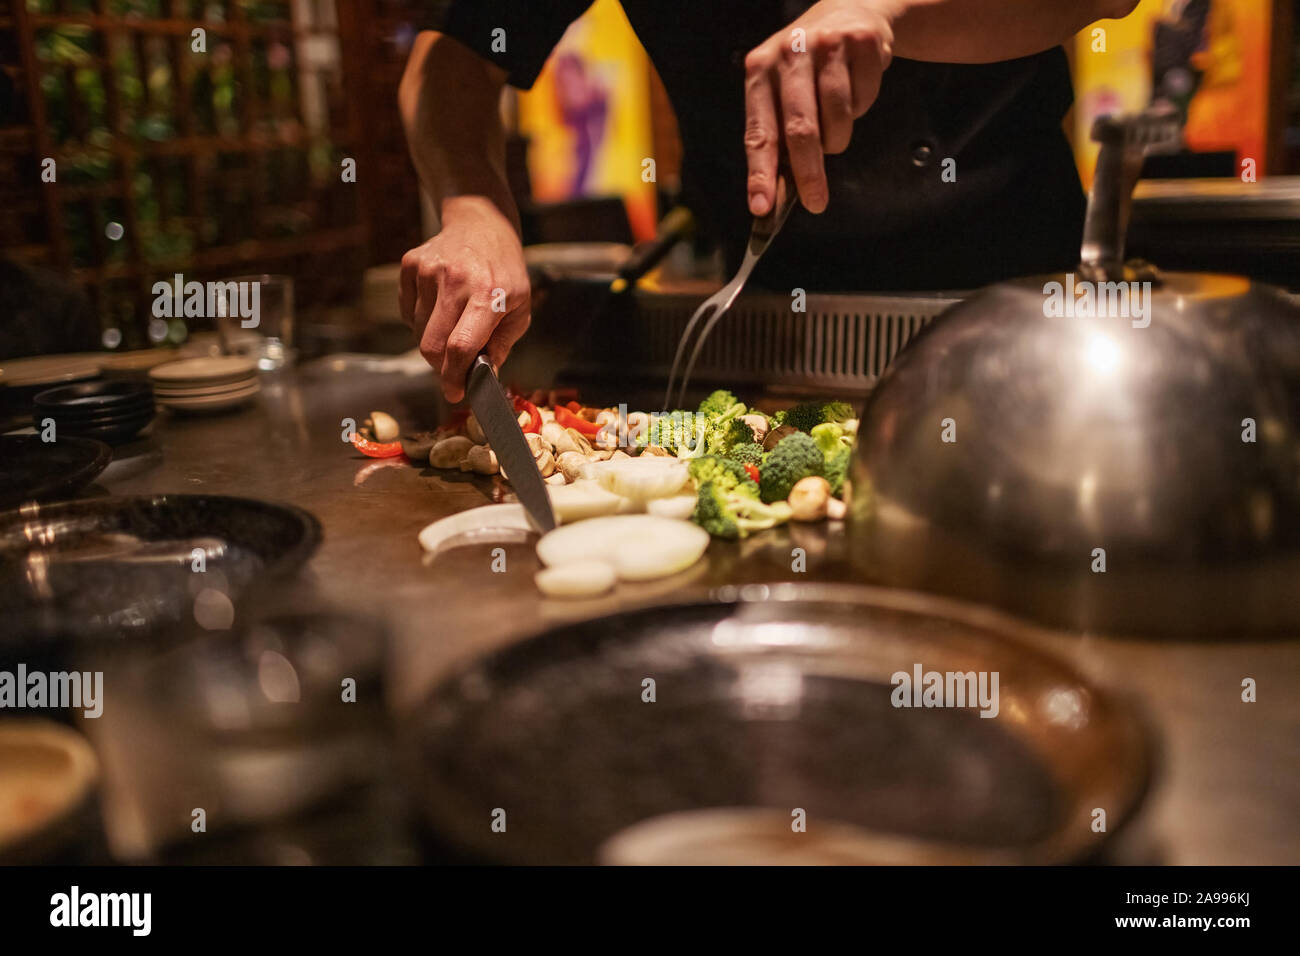 Teppanyaki chef preparing Japanese cuisine on hot metal plate by cutting up vegetables Stock Photo